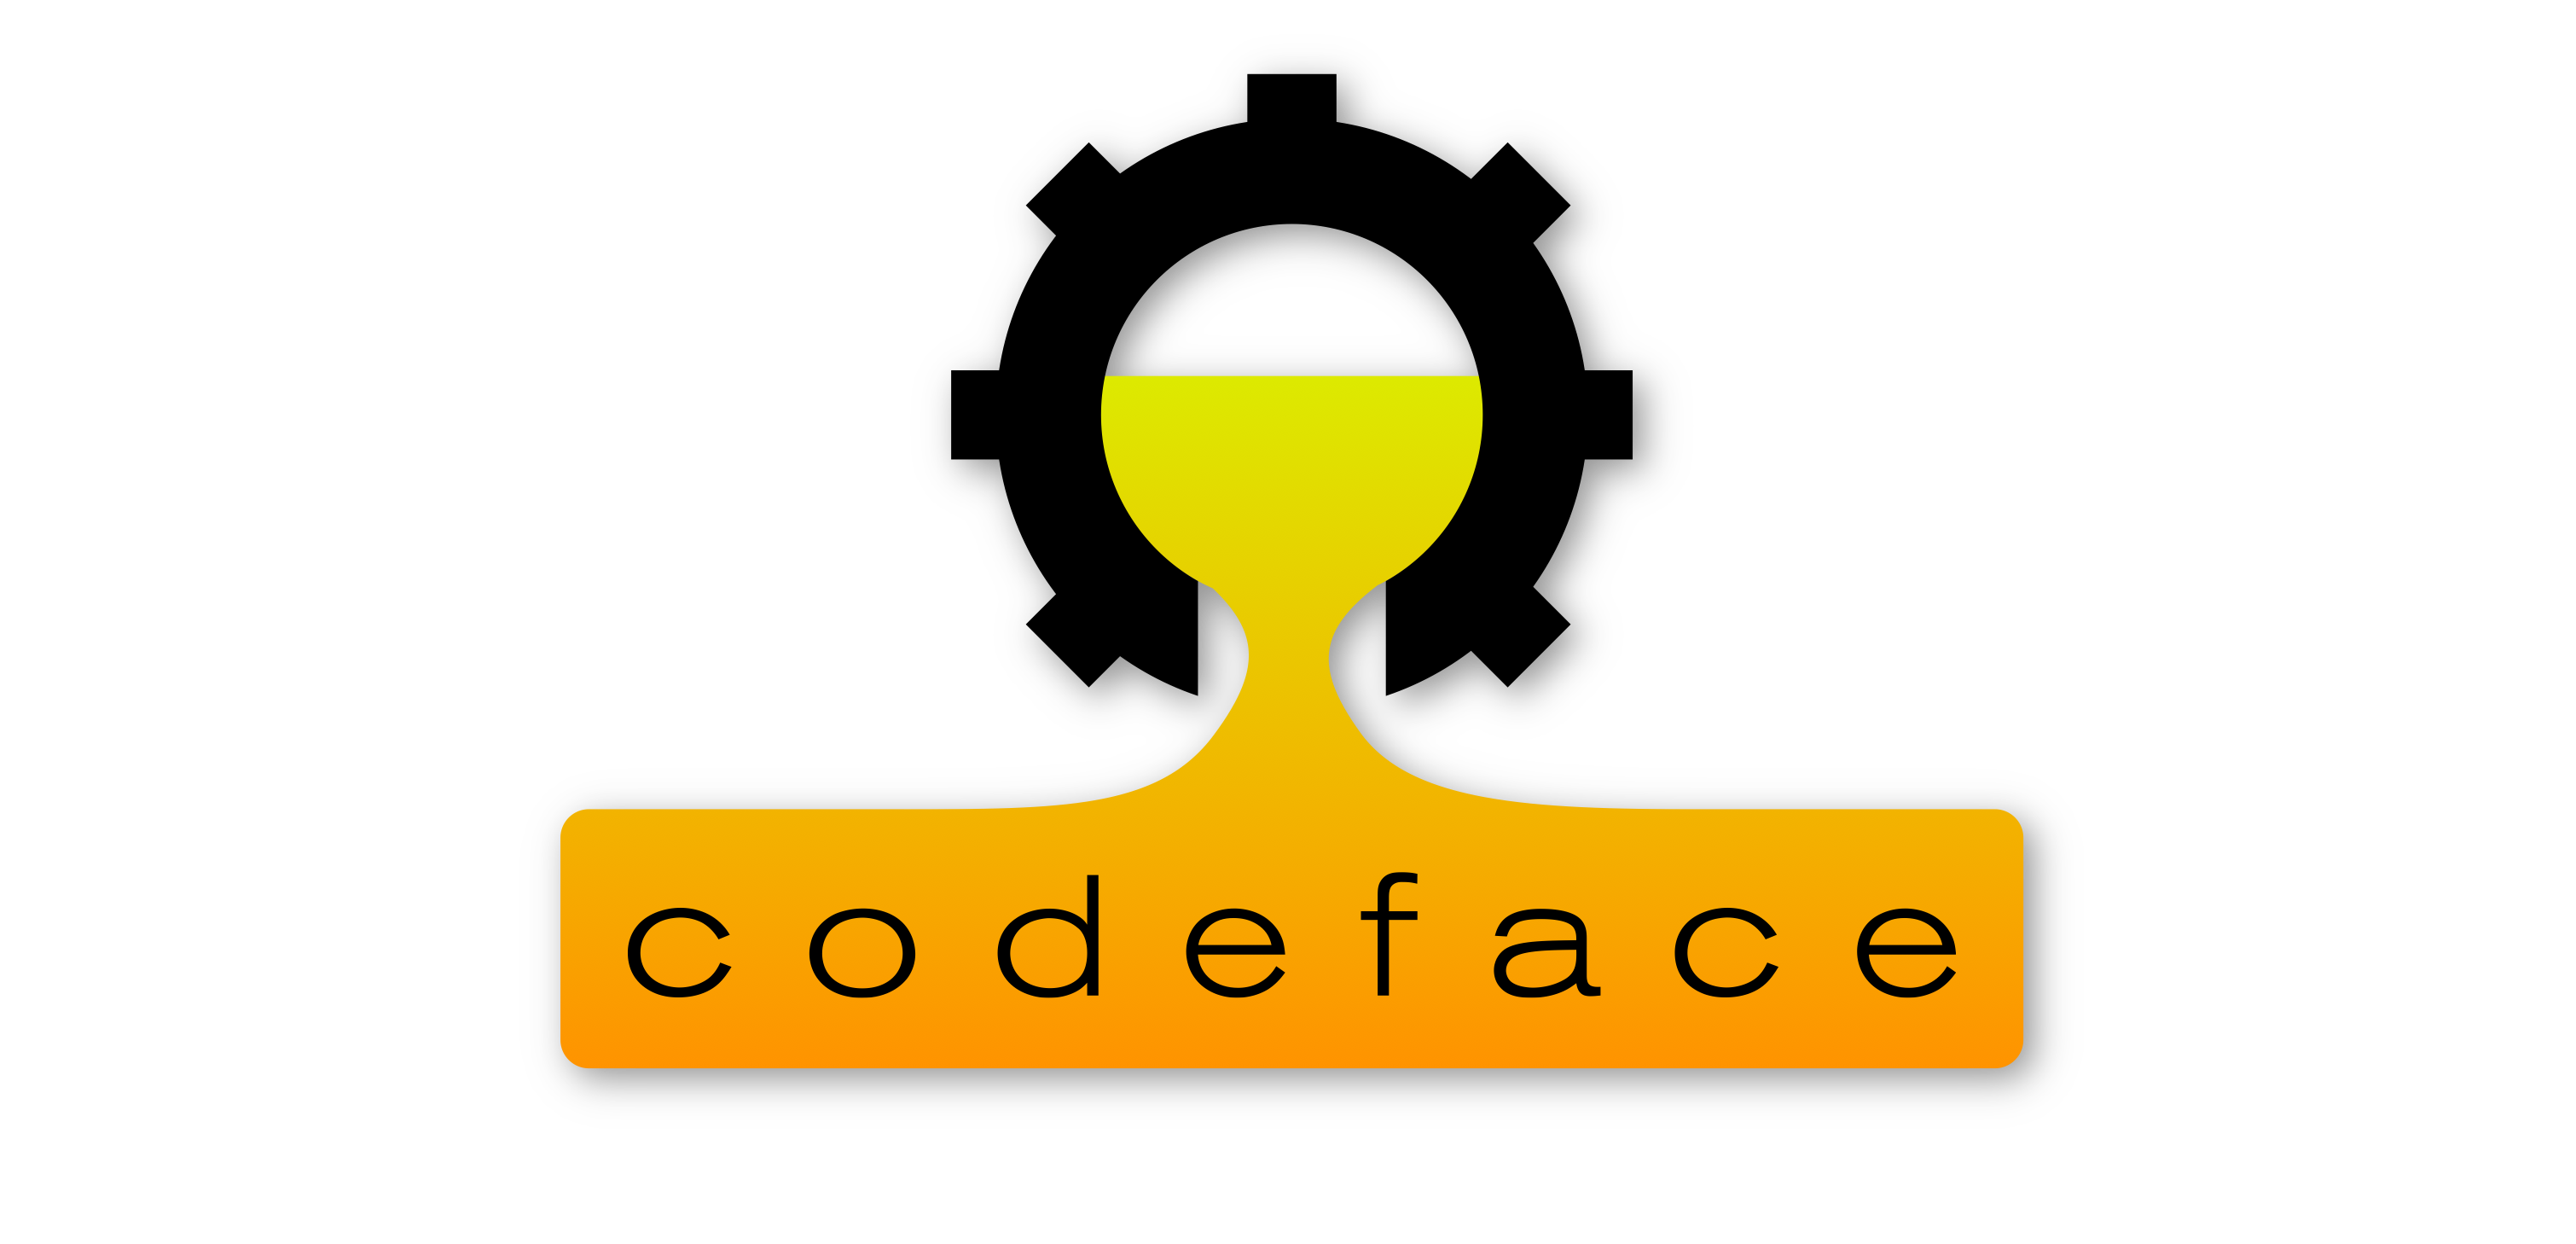 Codeface | Typefaces for source code beautification